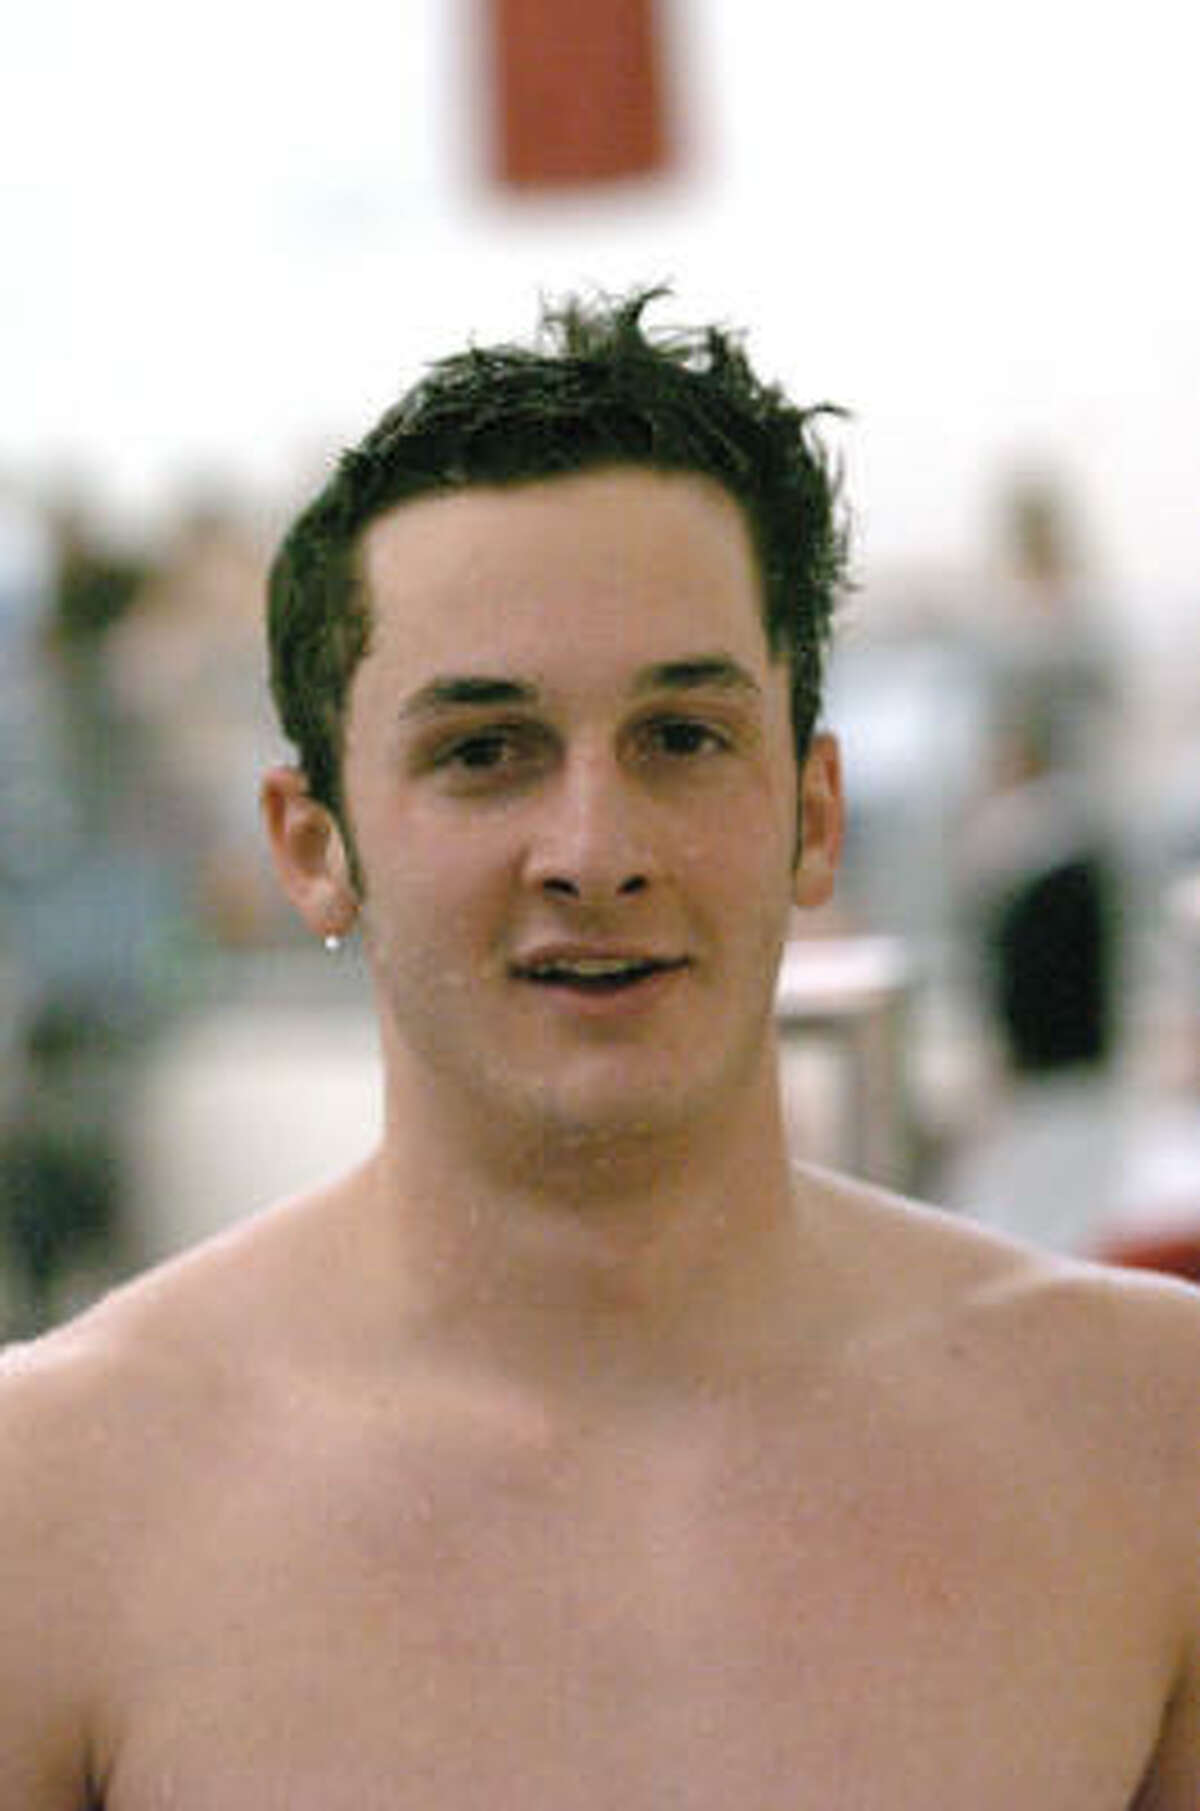 Brett Hlavinka of Waltrip will compete in the boys' 100-yard breaststroke at the UIL Class 5A State Swimming and Diving Championships this weekend at the Lee and Joe Jamail Texas Swimming Center at the University of Texas in Austin.